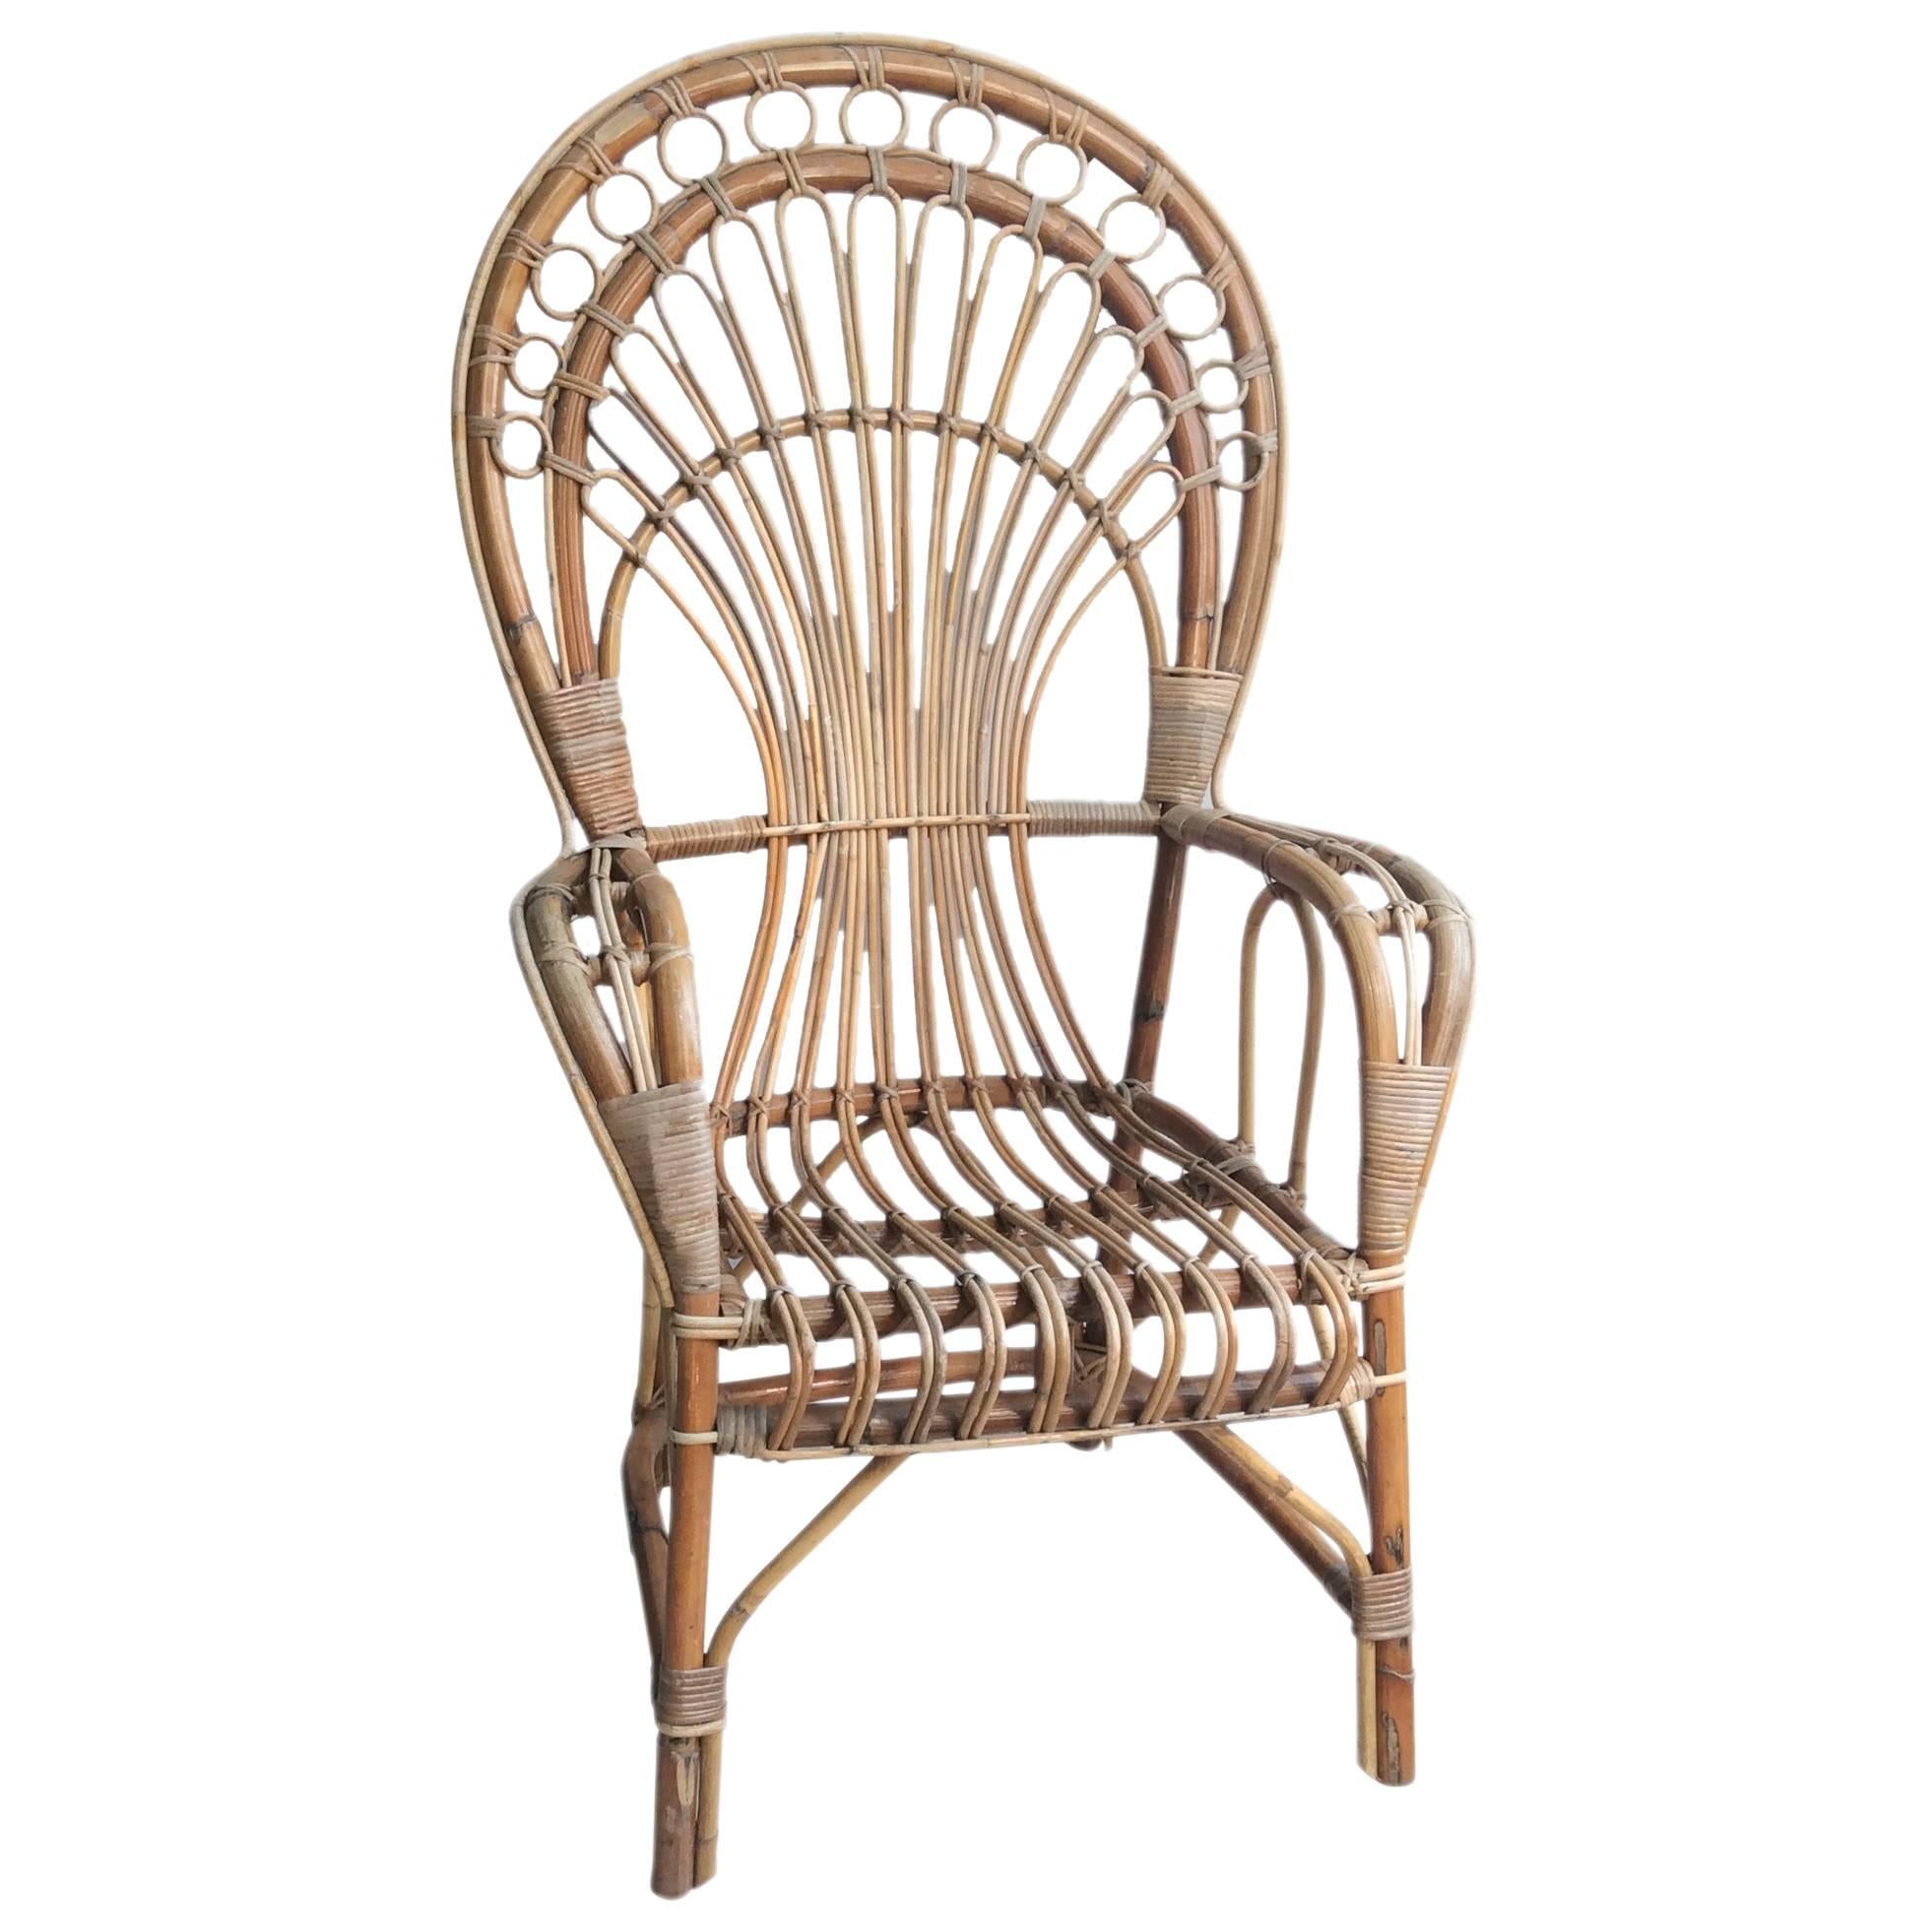 Iconic Rattan Peacock Chair, 1970s For Sale